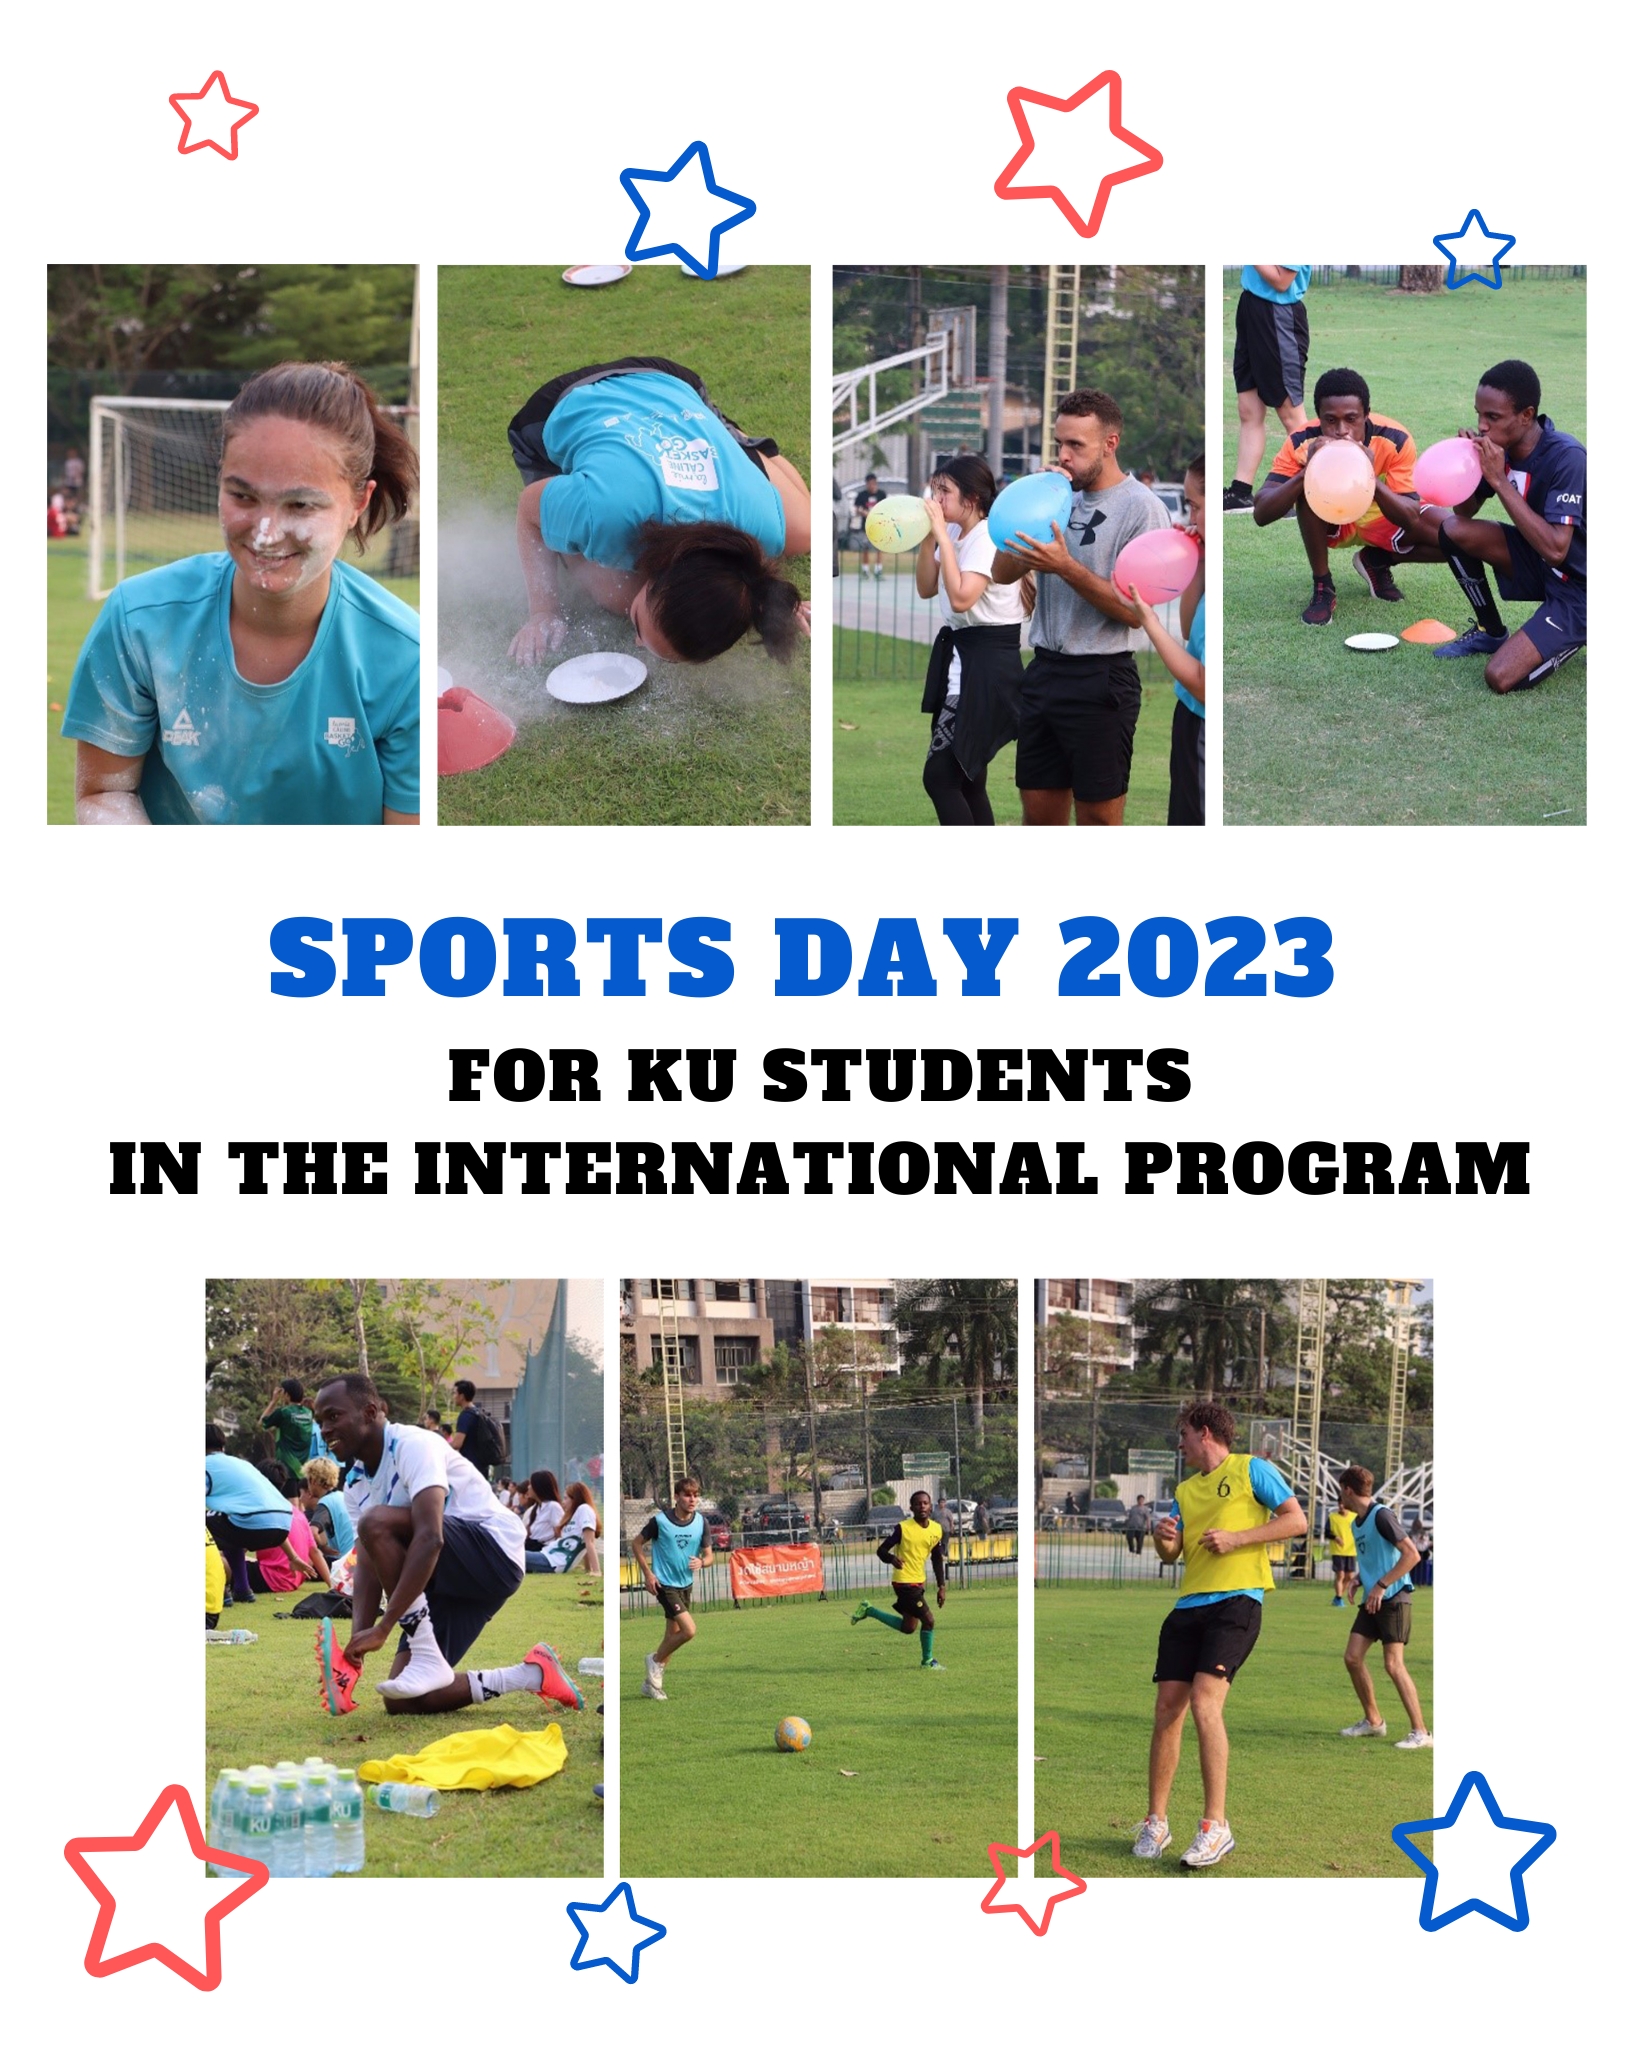 Sports Day 2023 for KU Students in the International Program